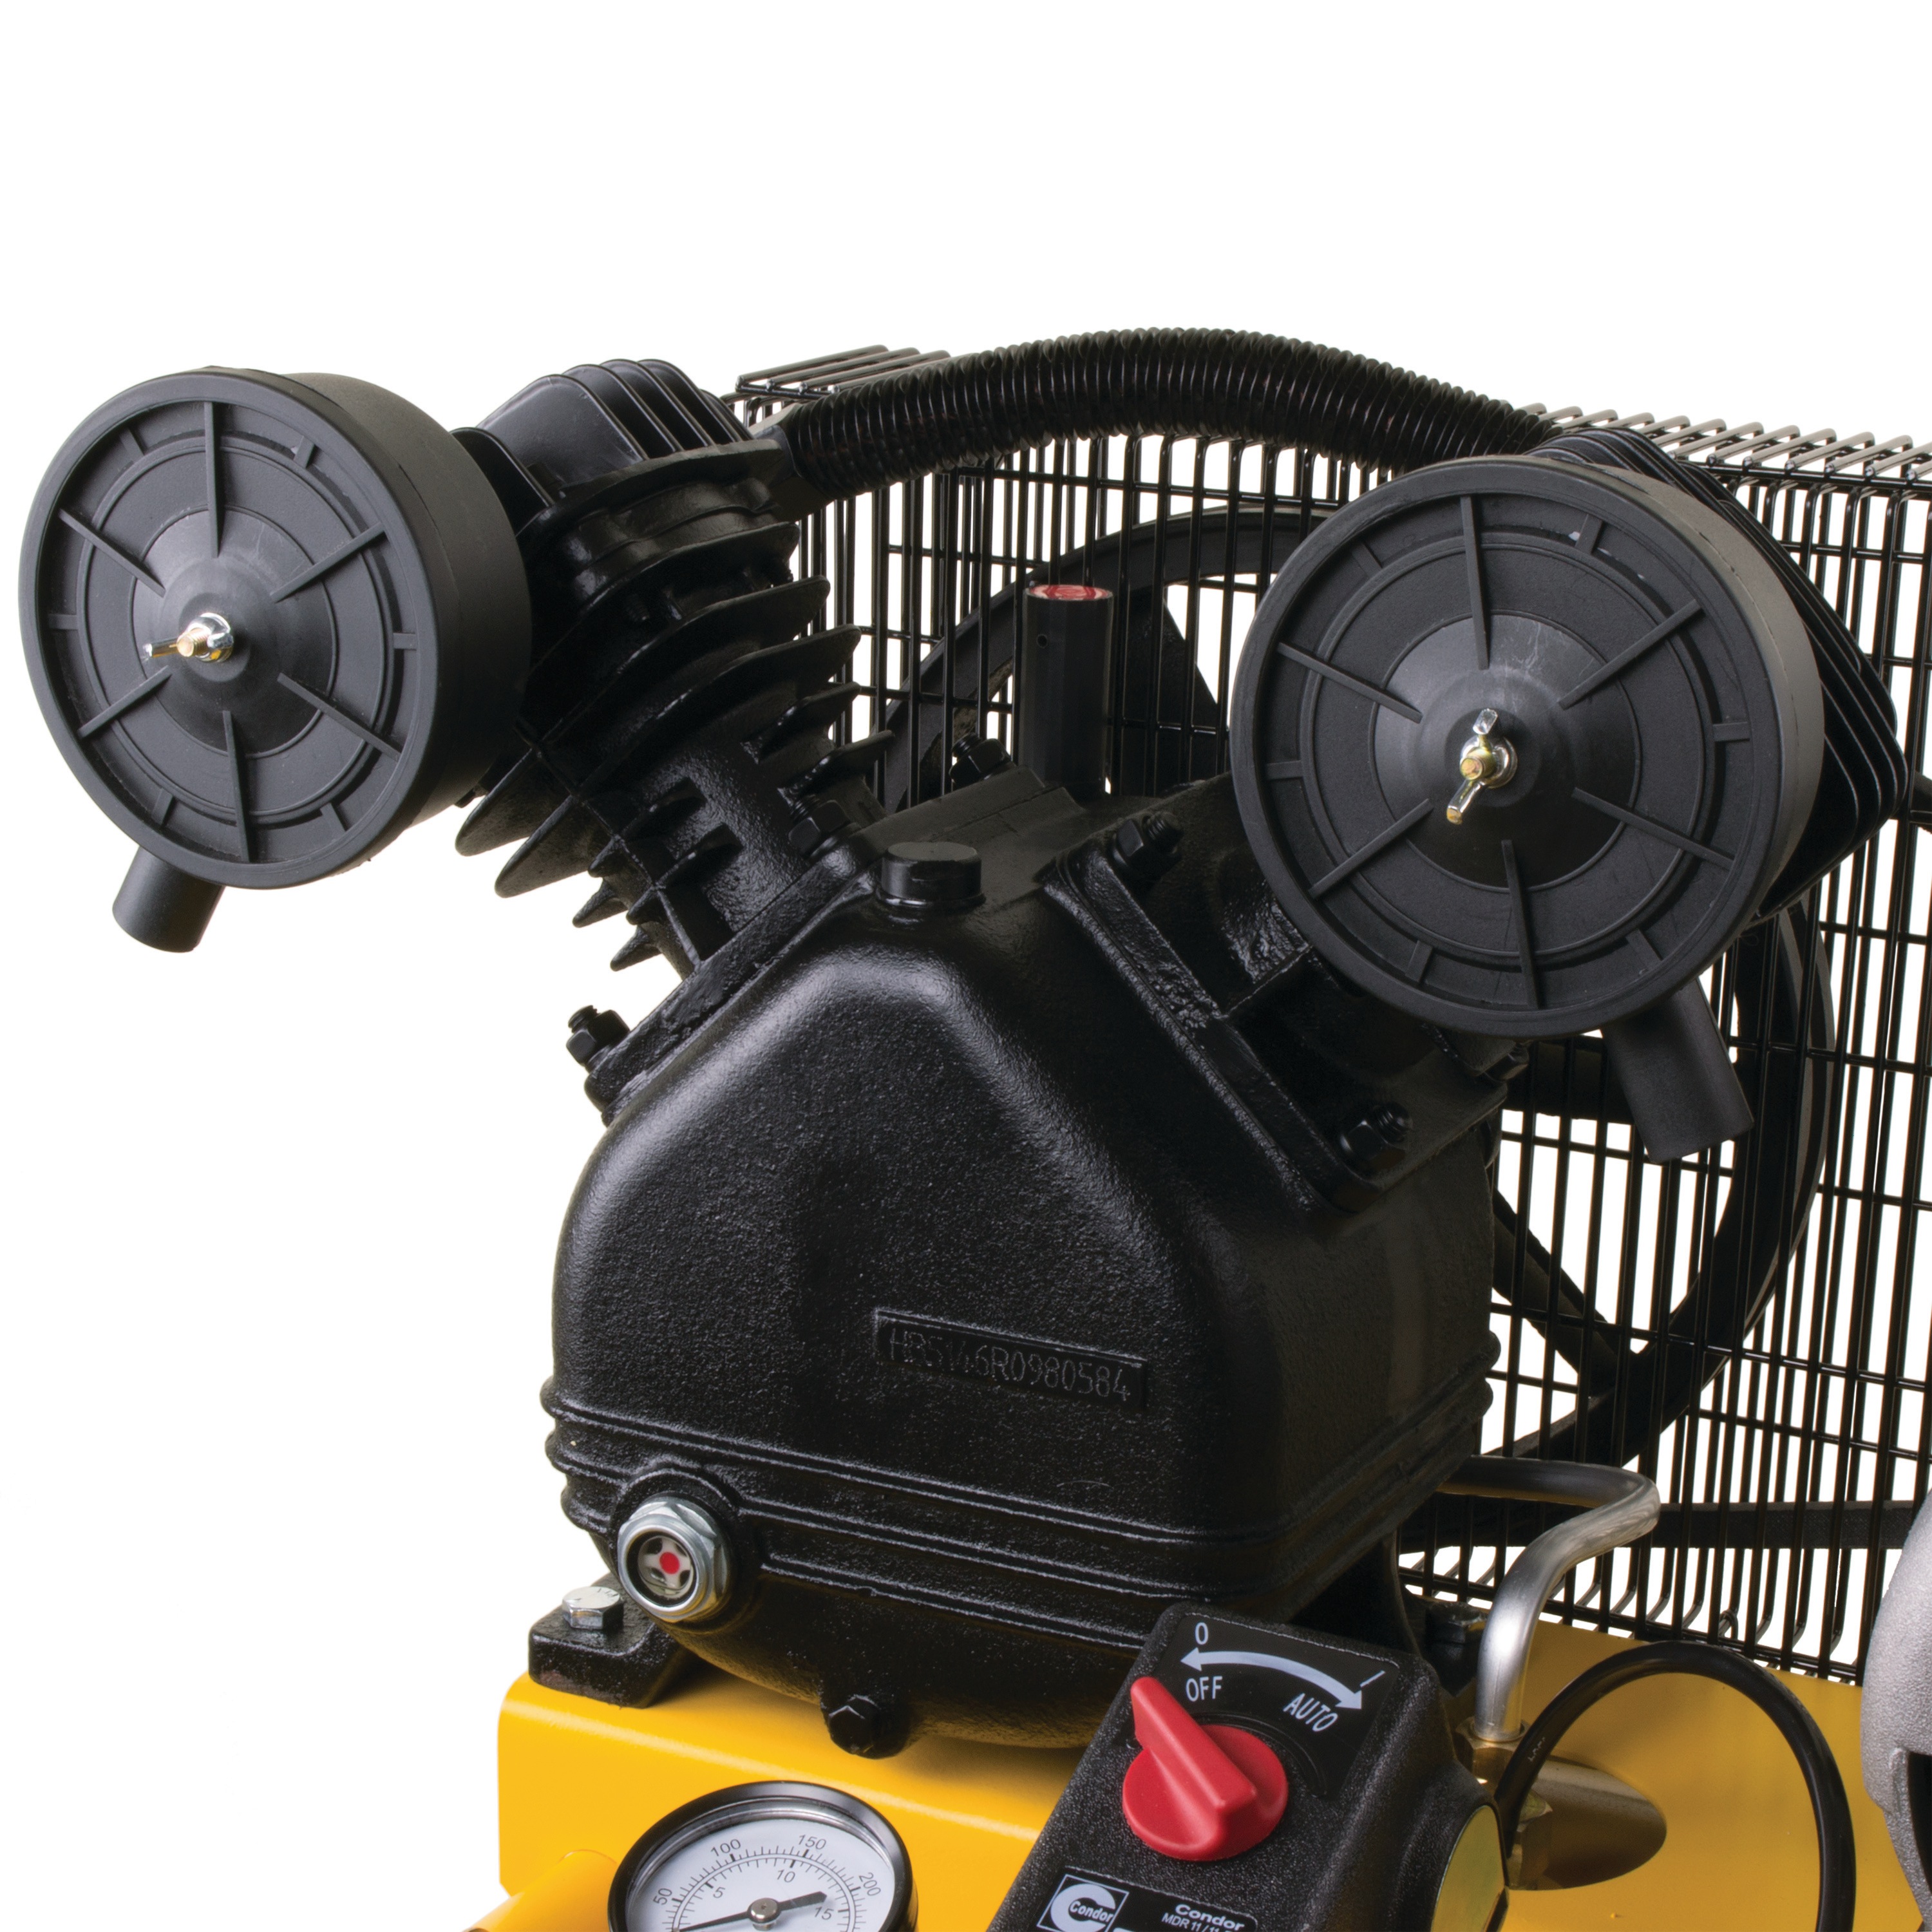 Twin V cast iron pump with 1 piece cast iron crank case feature of 30 gallons Portable Electric Air Compressor.